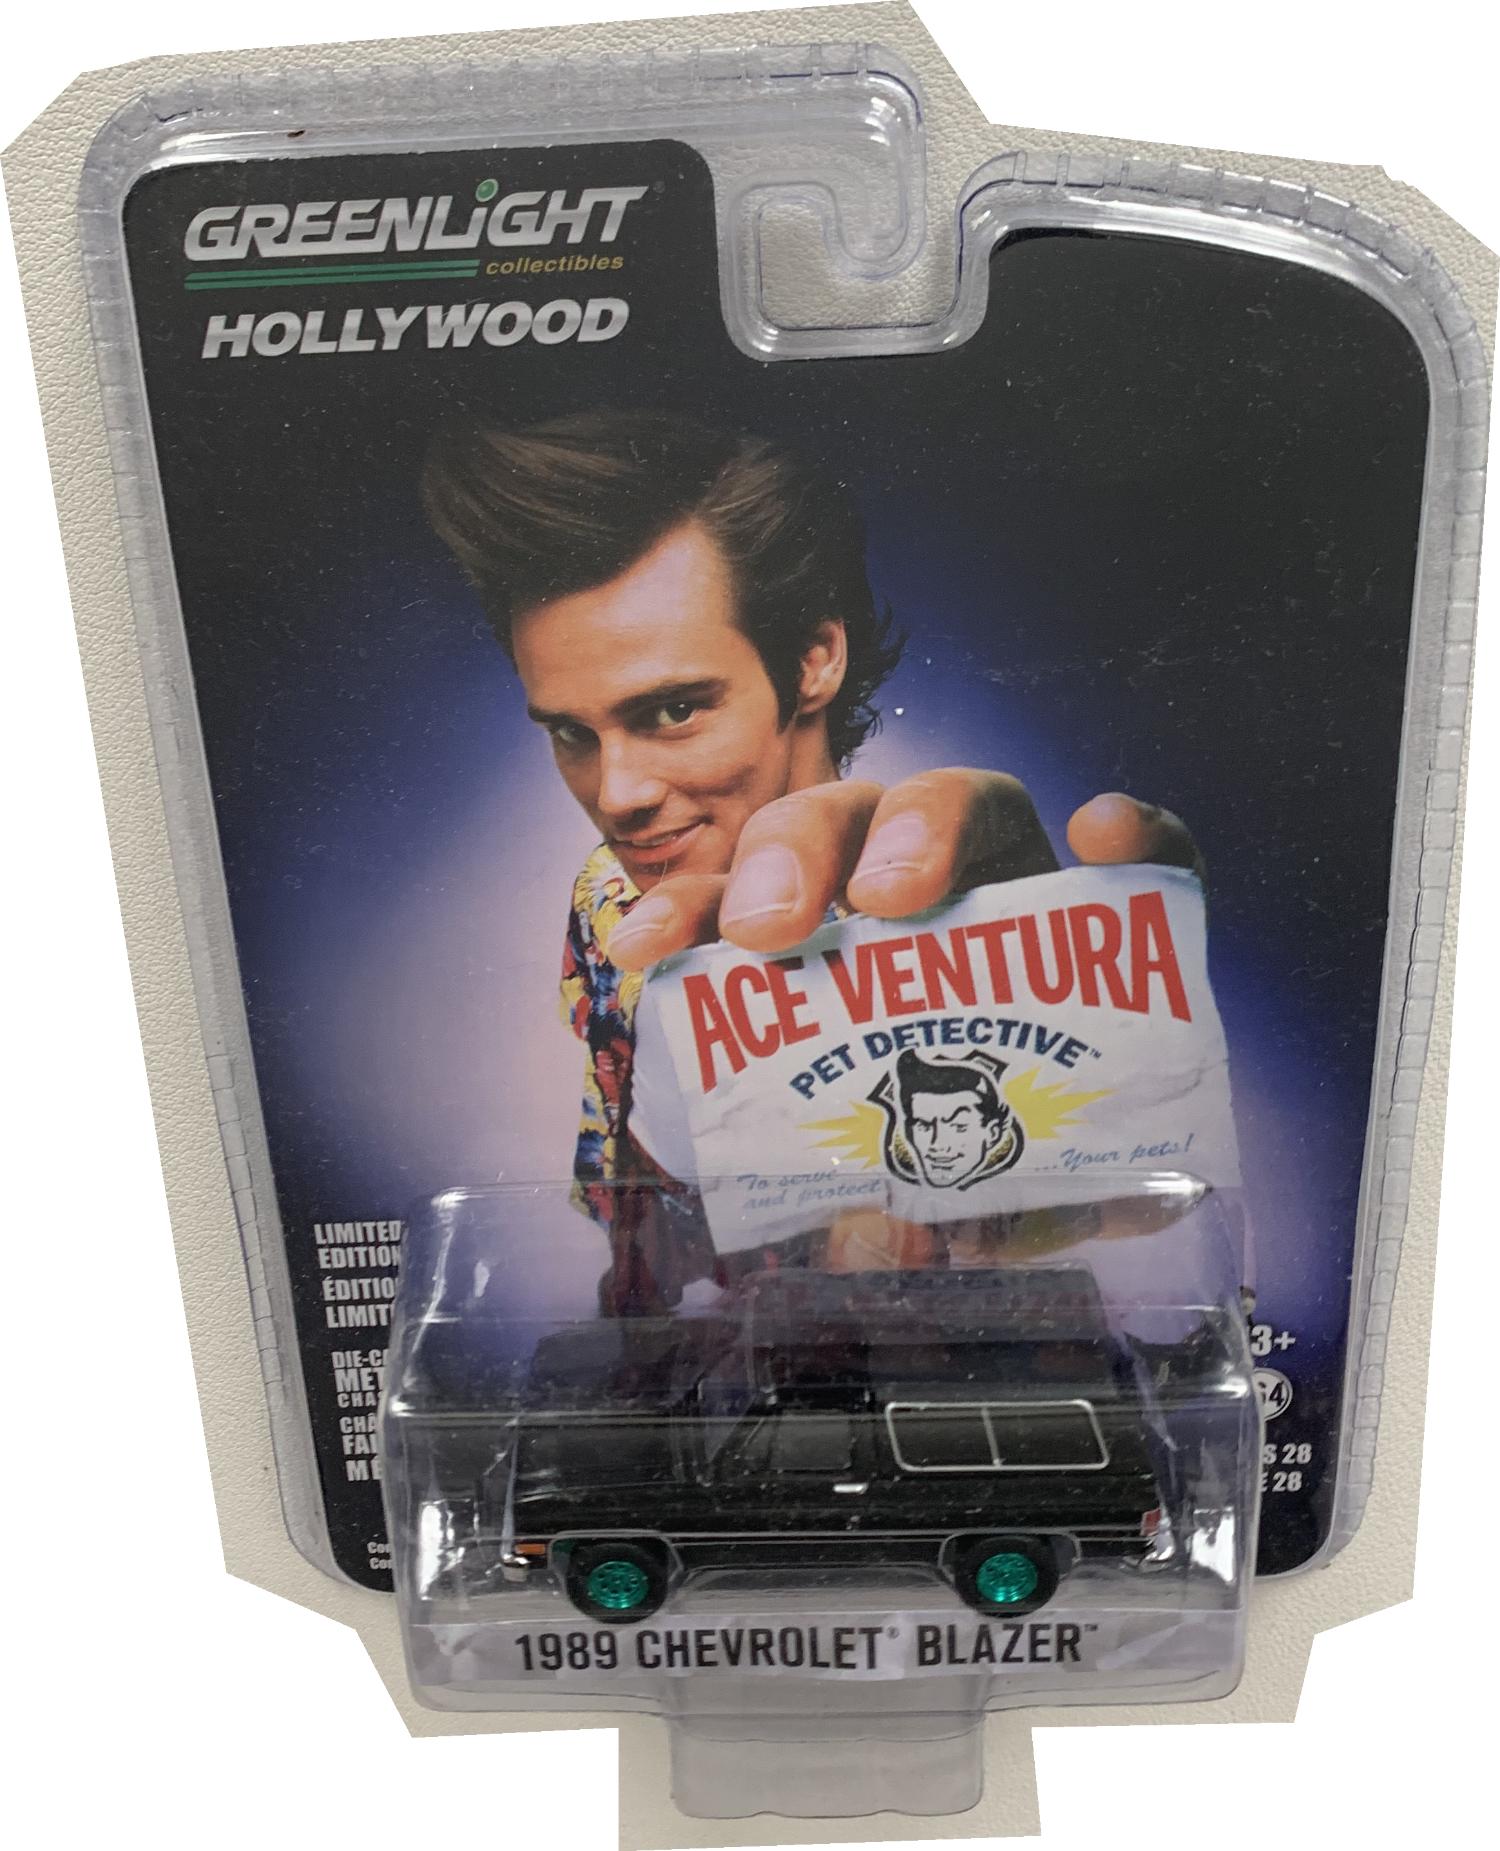 Ace Ventura, Pet Detective, 1989 Chevrolet Blazer in black with green wheels 1:64 scale diecast  model from Greenlight, Green Machines, limited edition